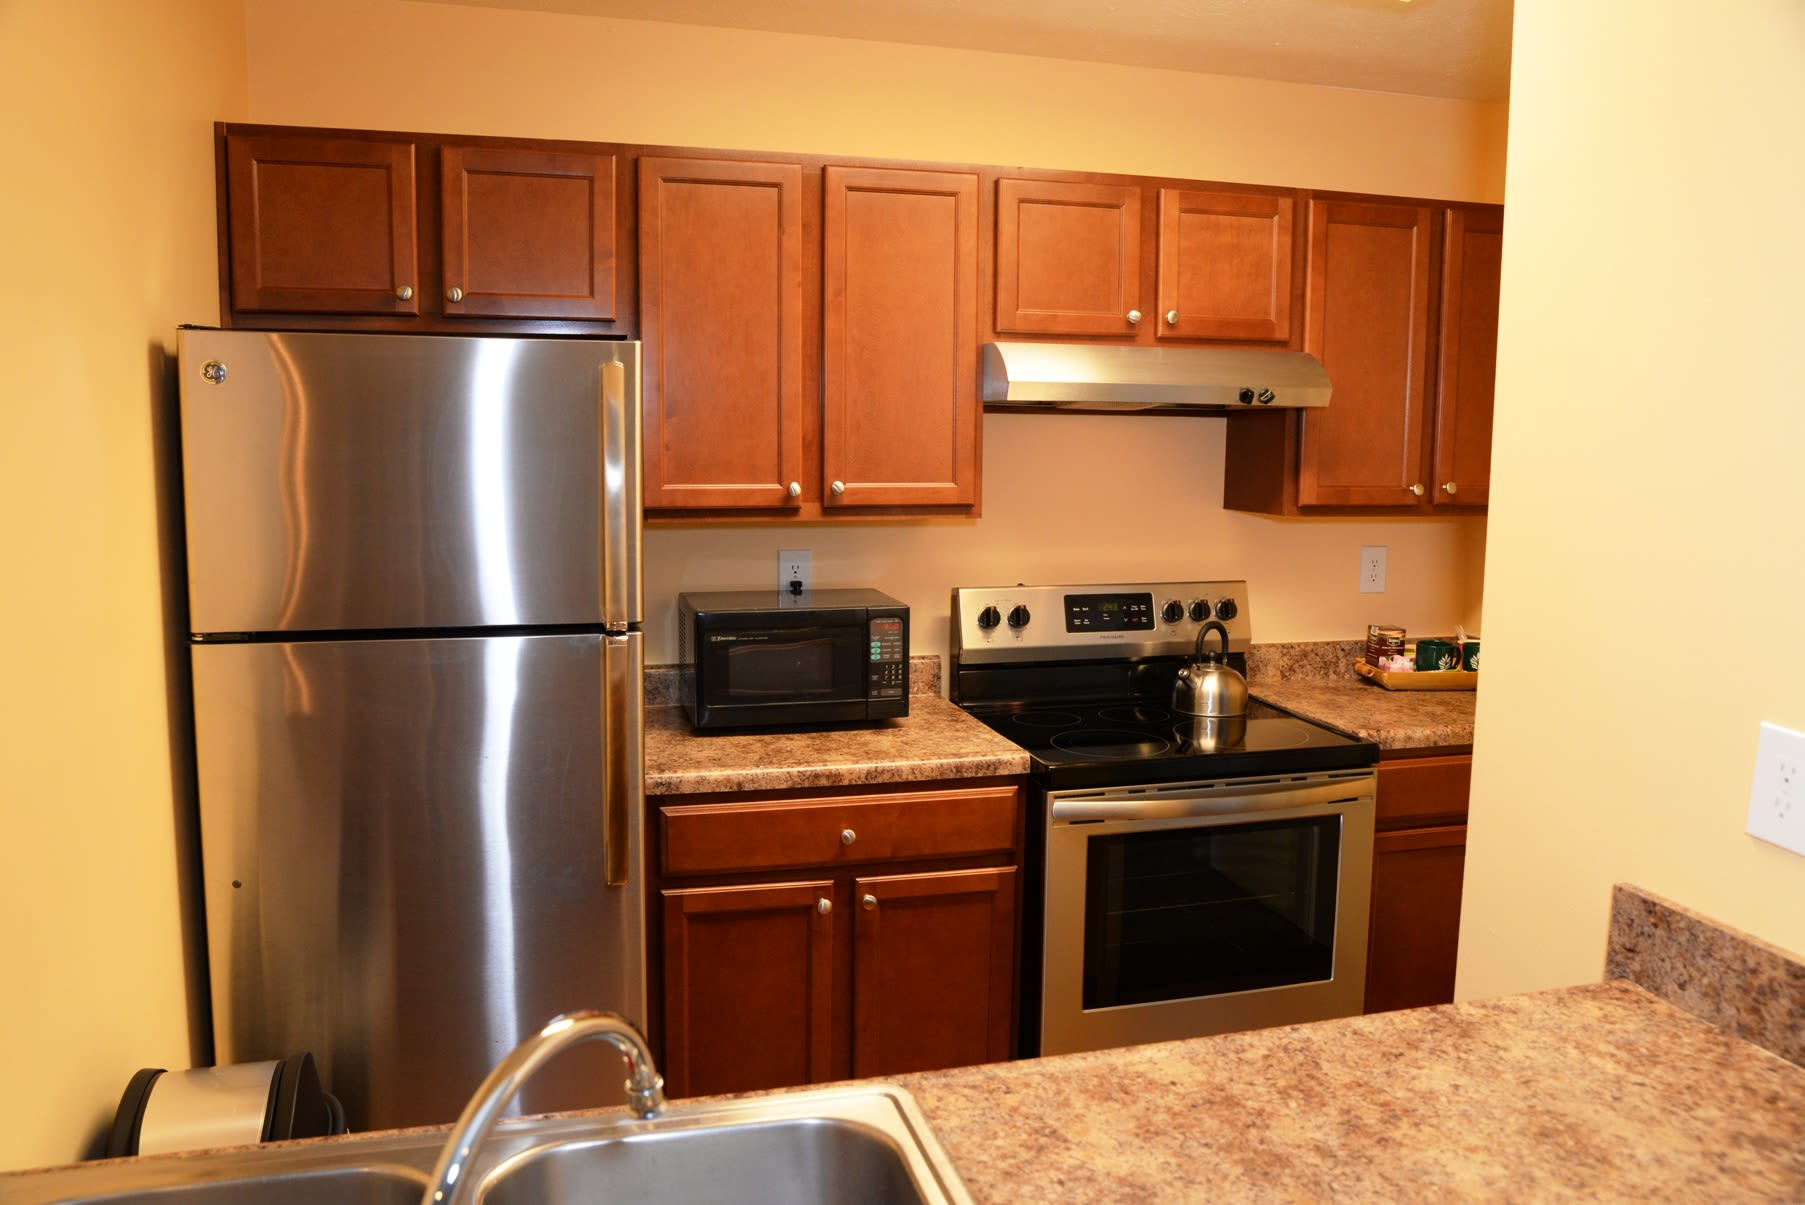 Model kitchen at North River Place in Chillicothe, Ohio